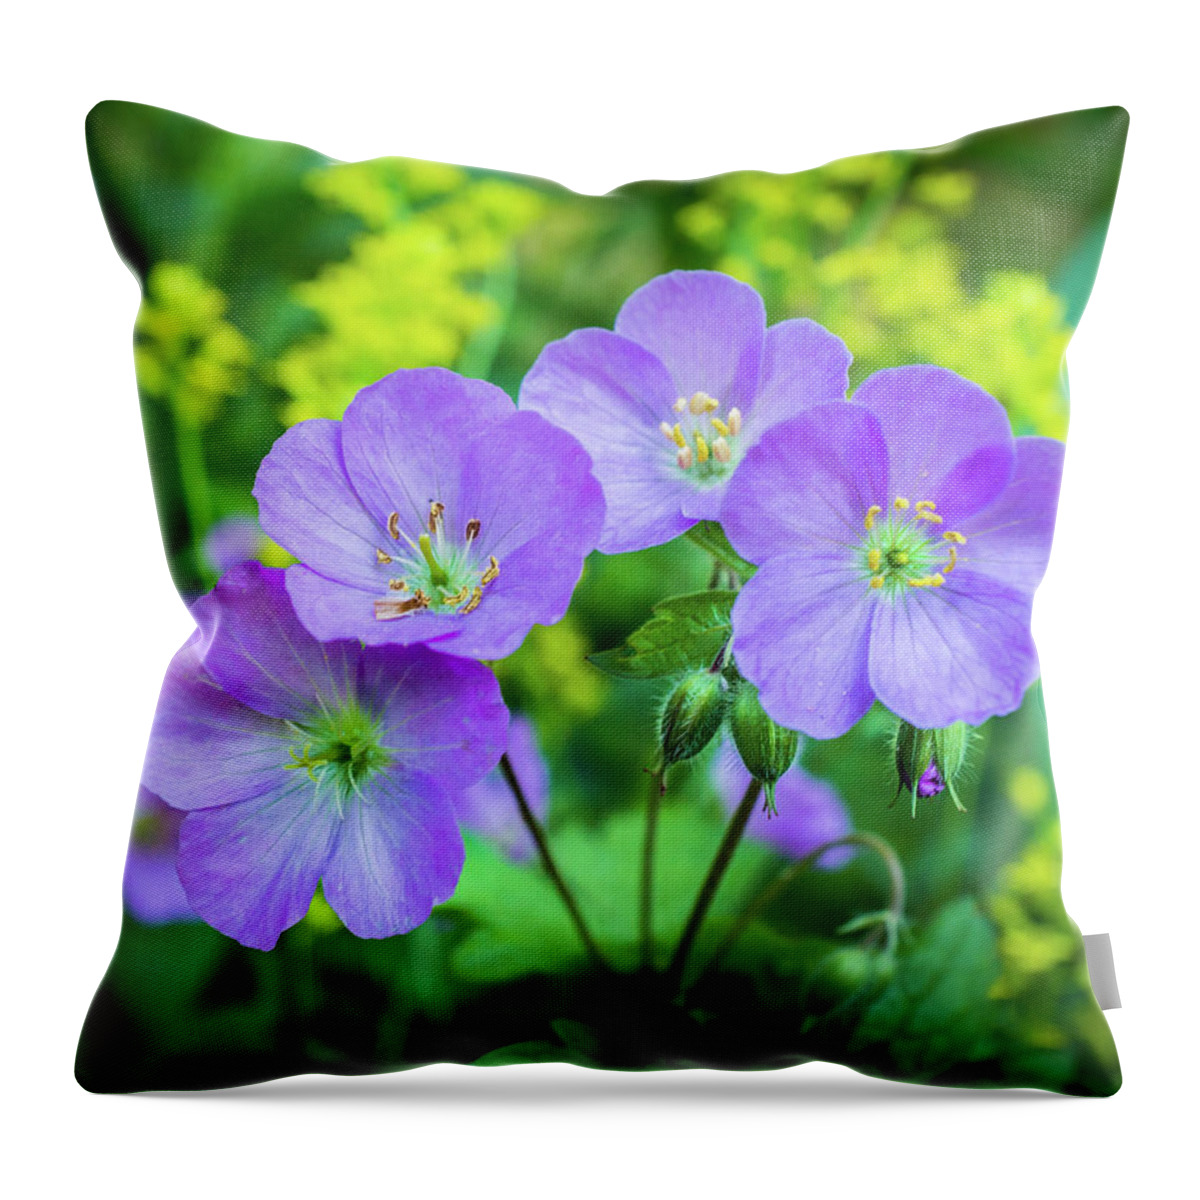 Wildflower Throw Pillow featuring the photograph Wild Geranium Family Portrait by Bill Pevlor